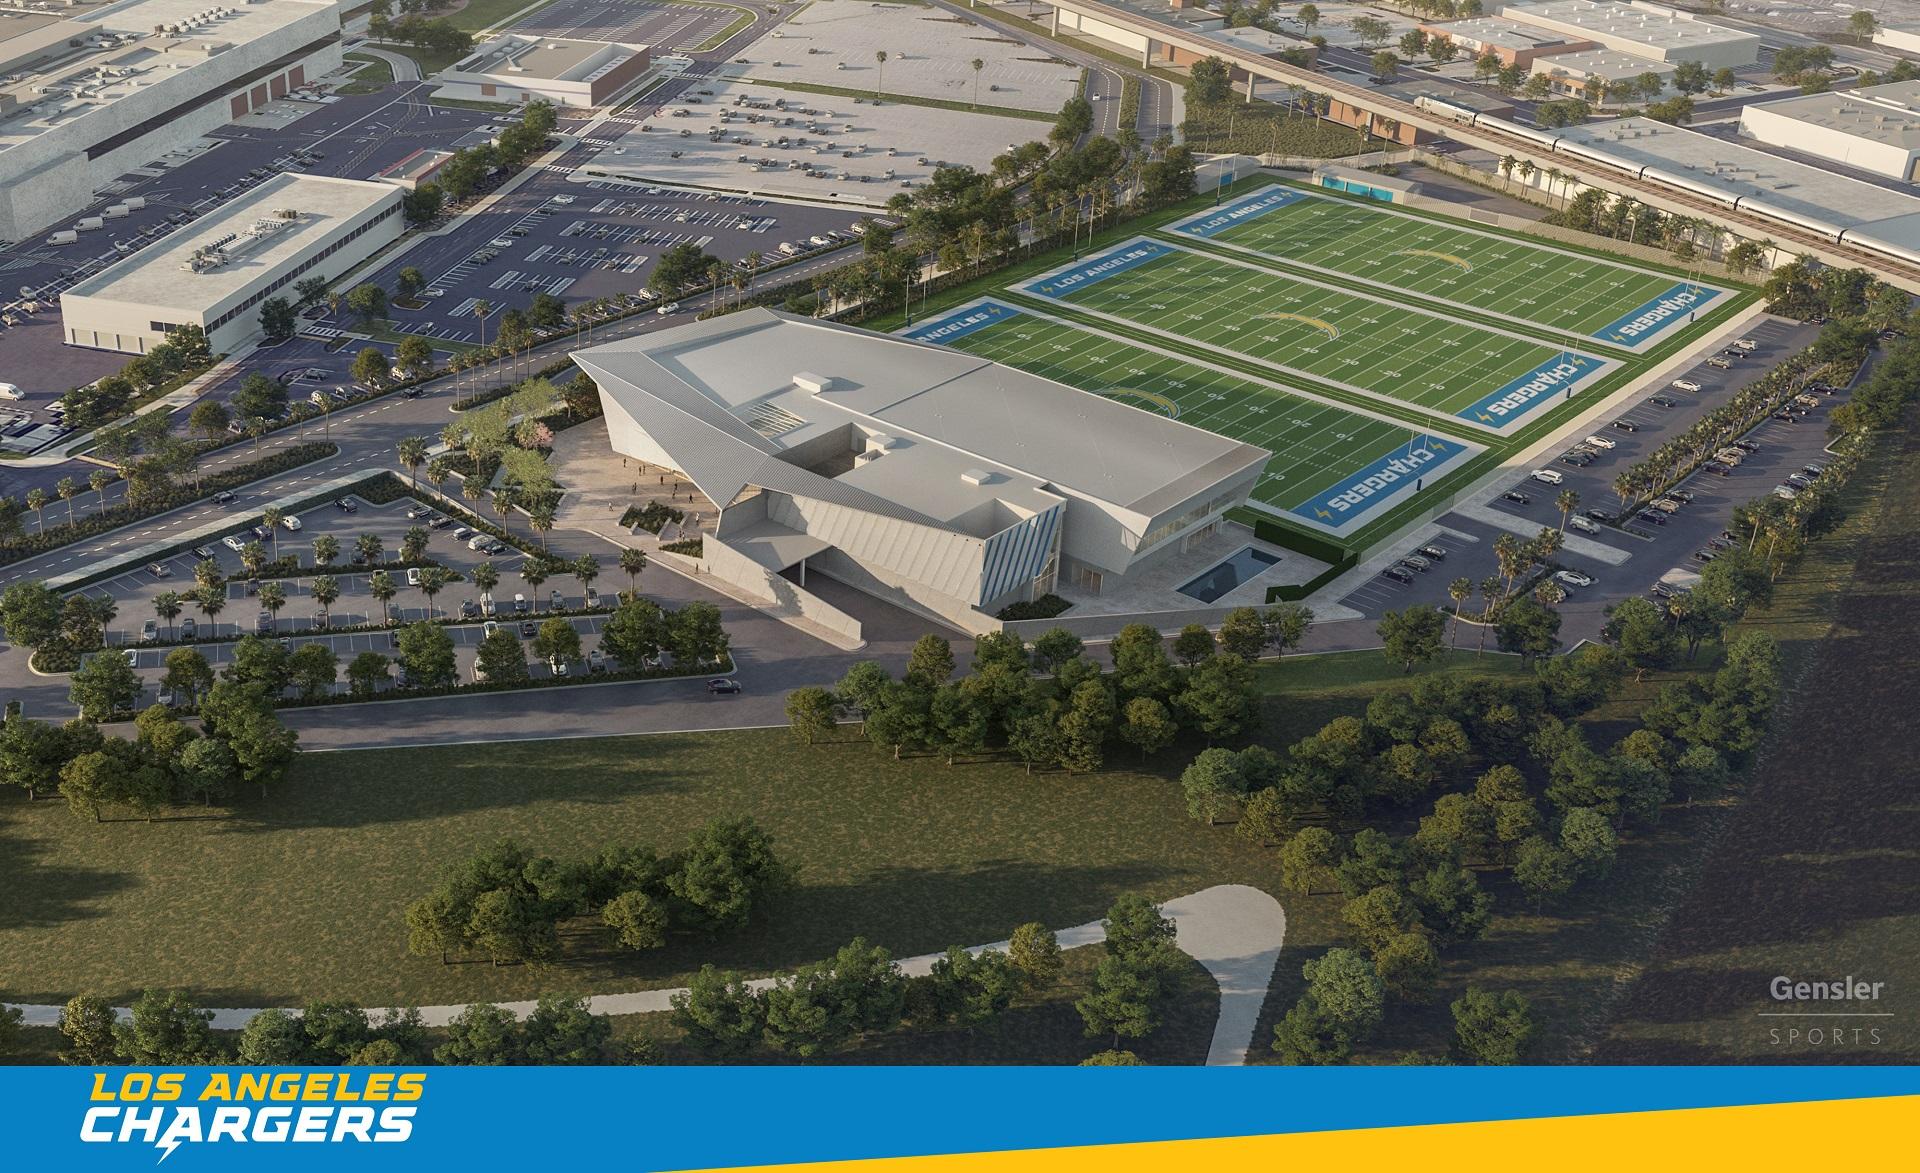 LA Chargers HQ Aerial View